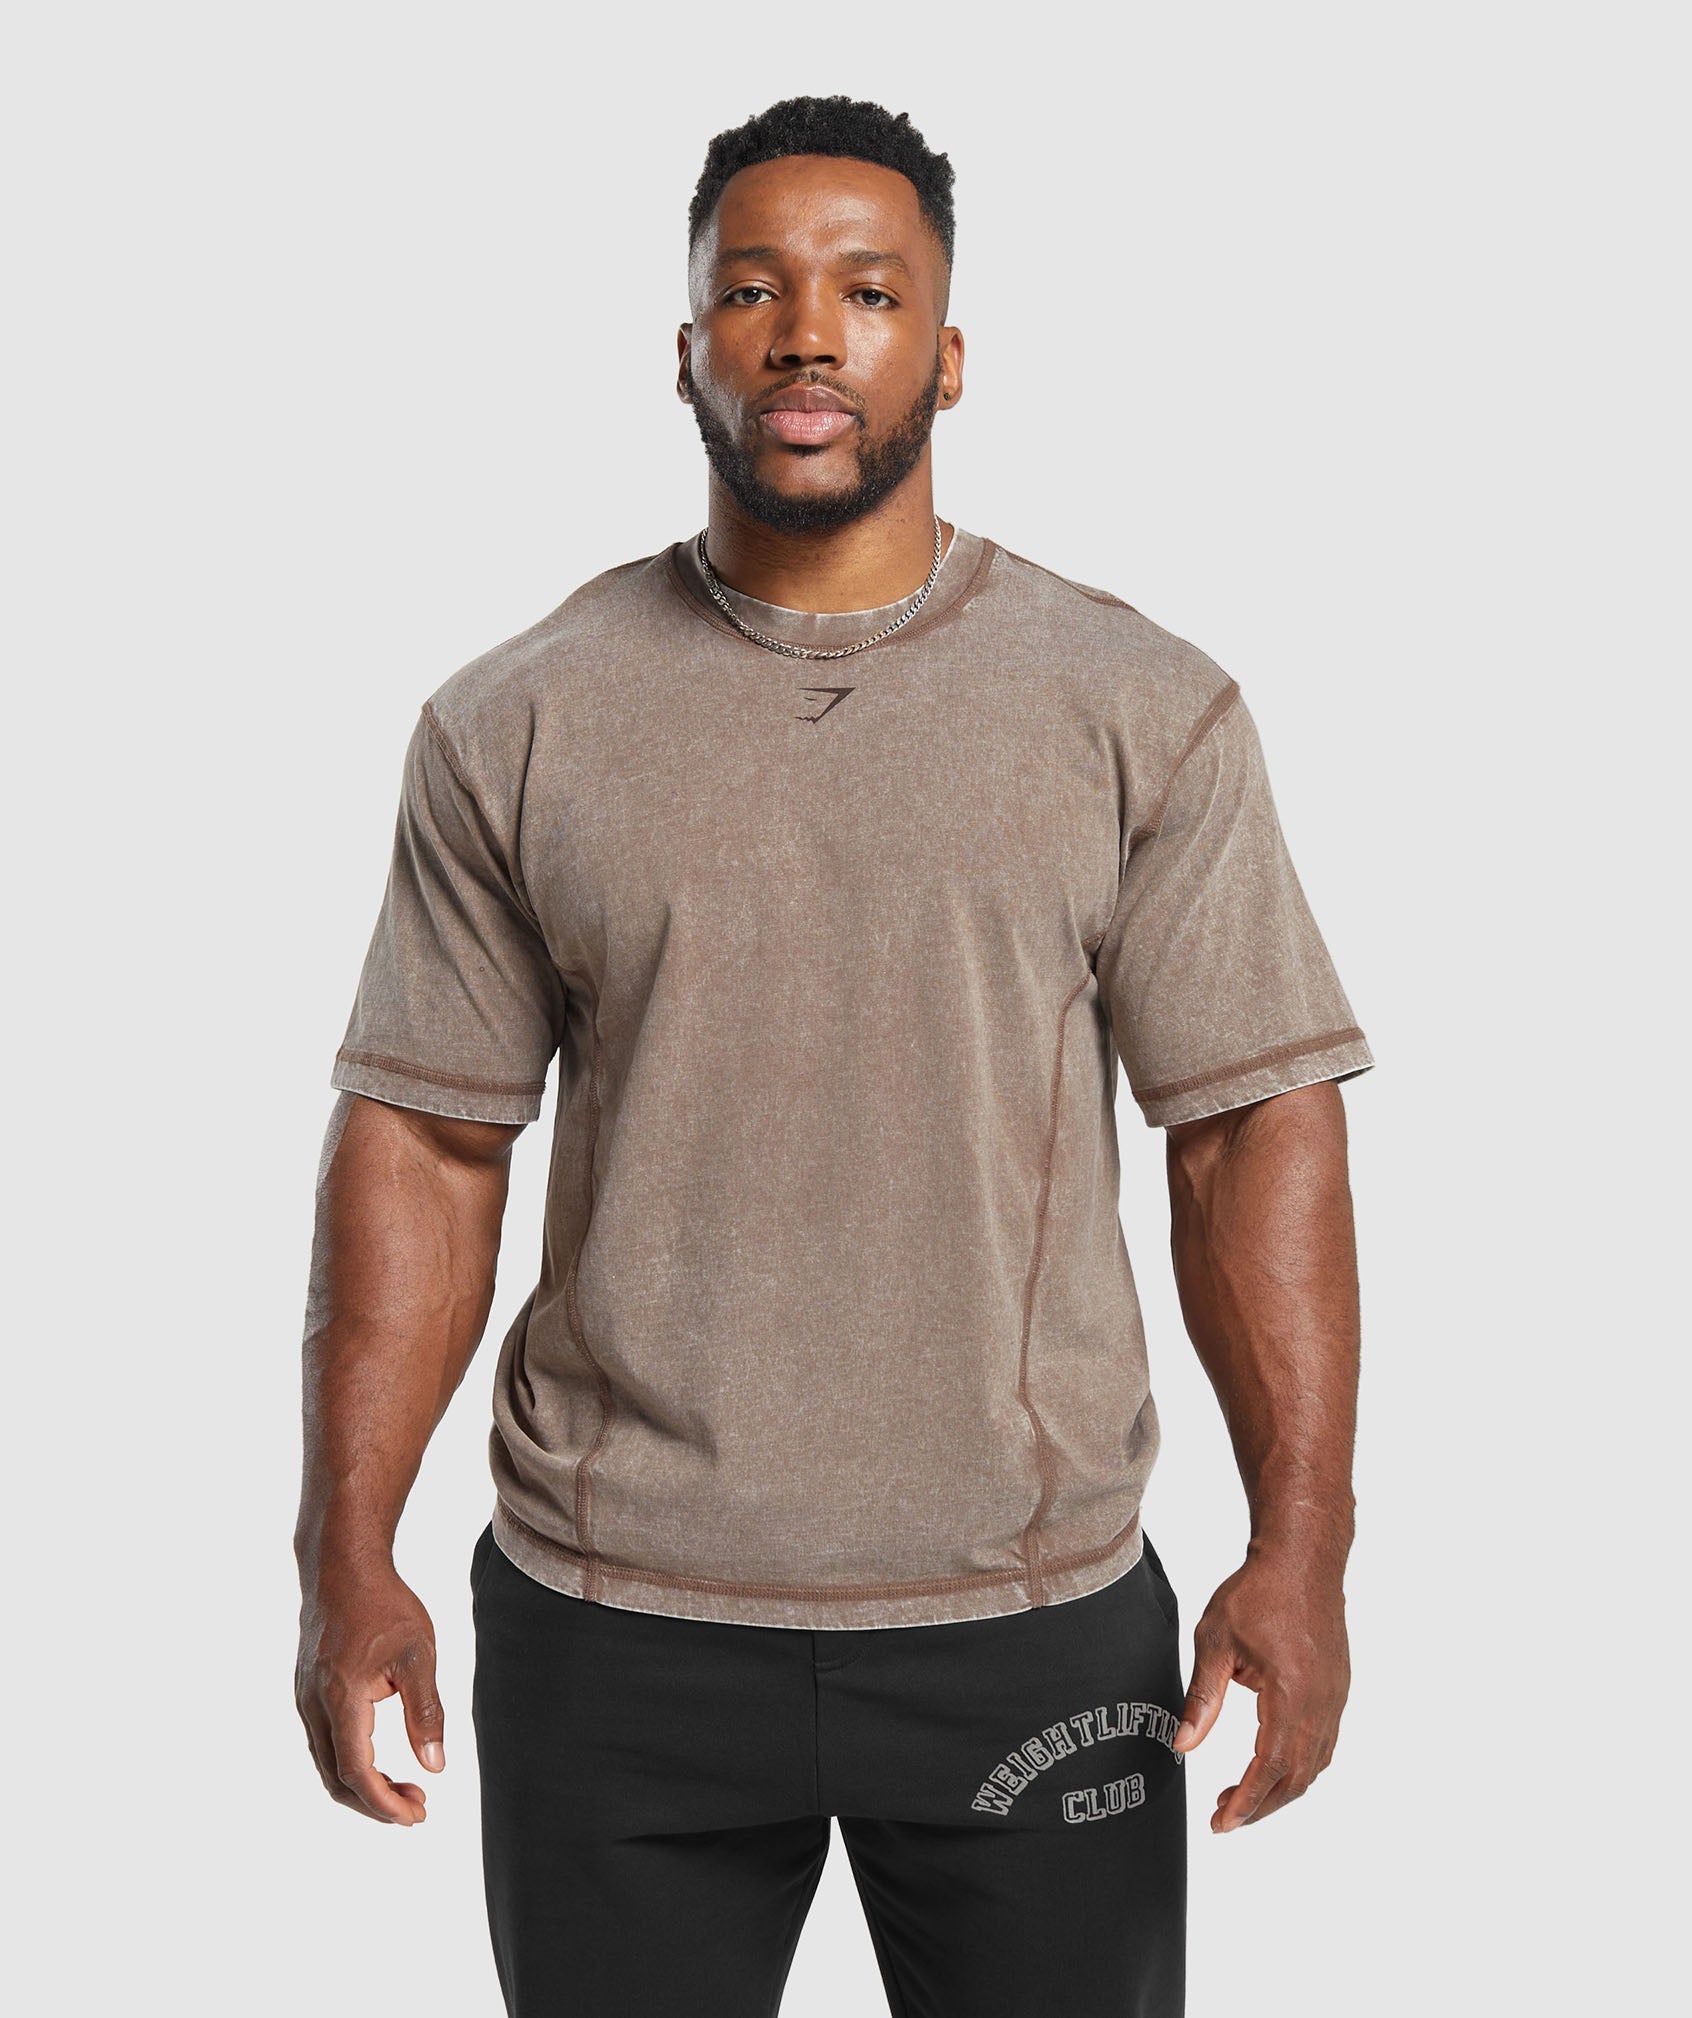 Heritage Washed T-Shirt in Penny Brown - view 2